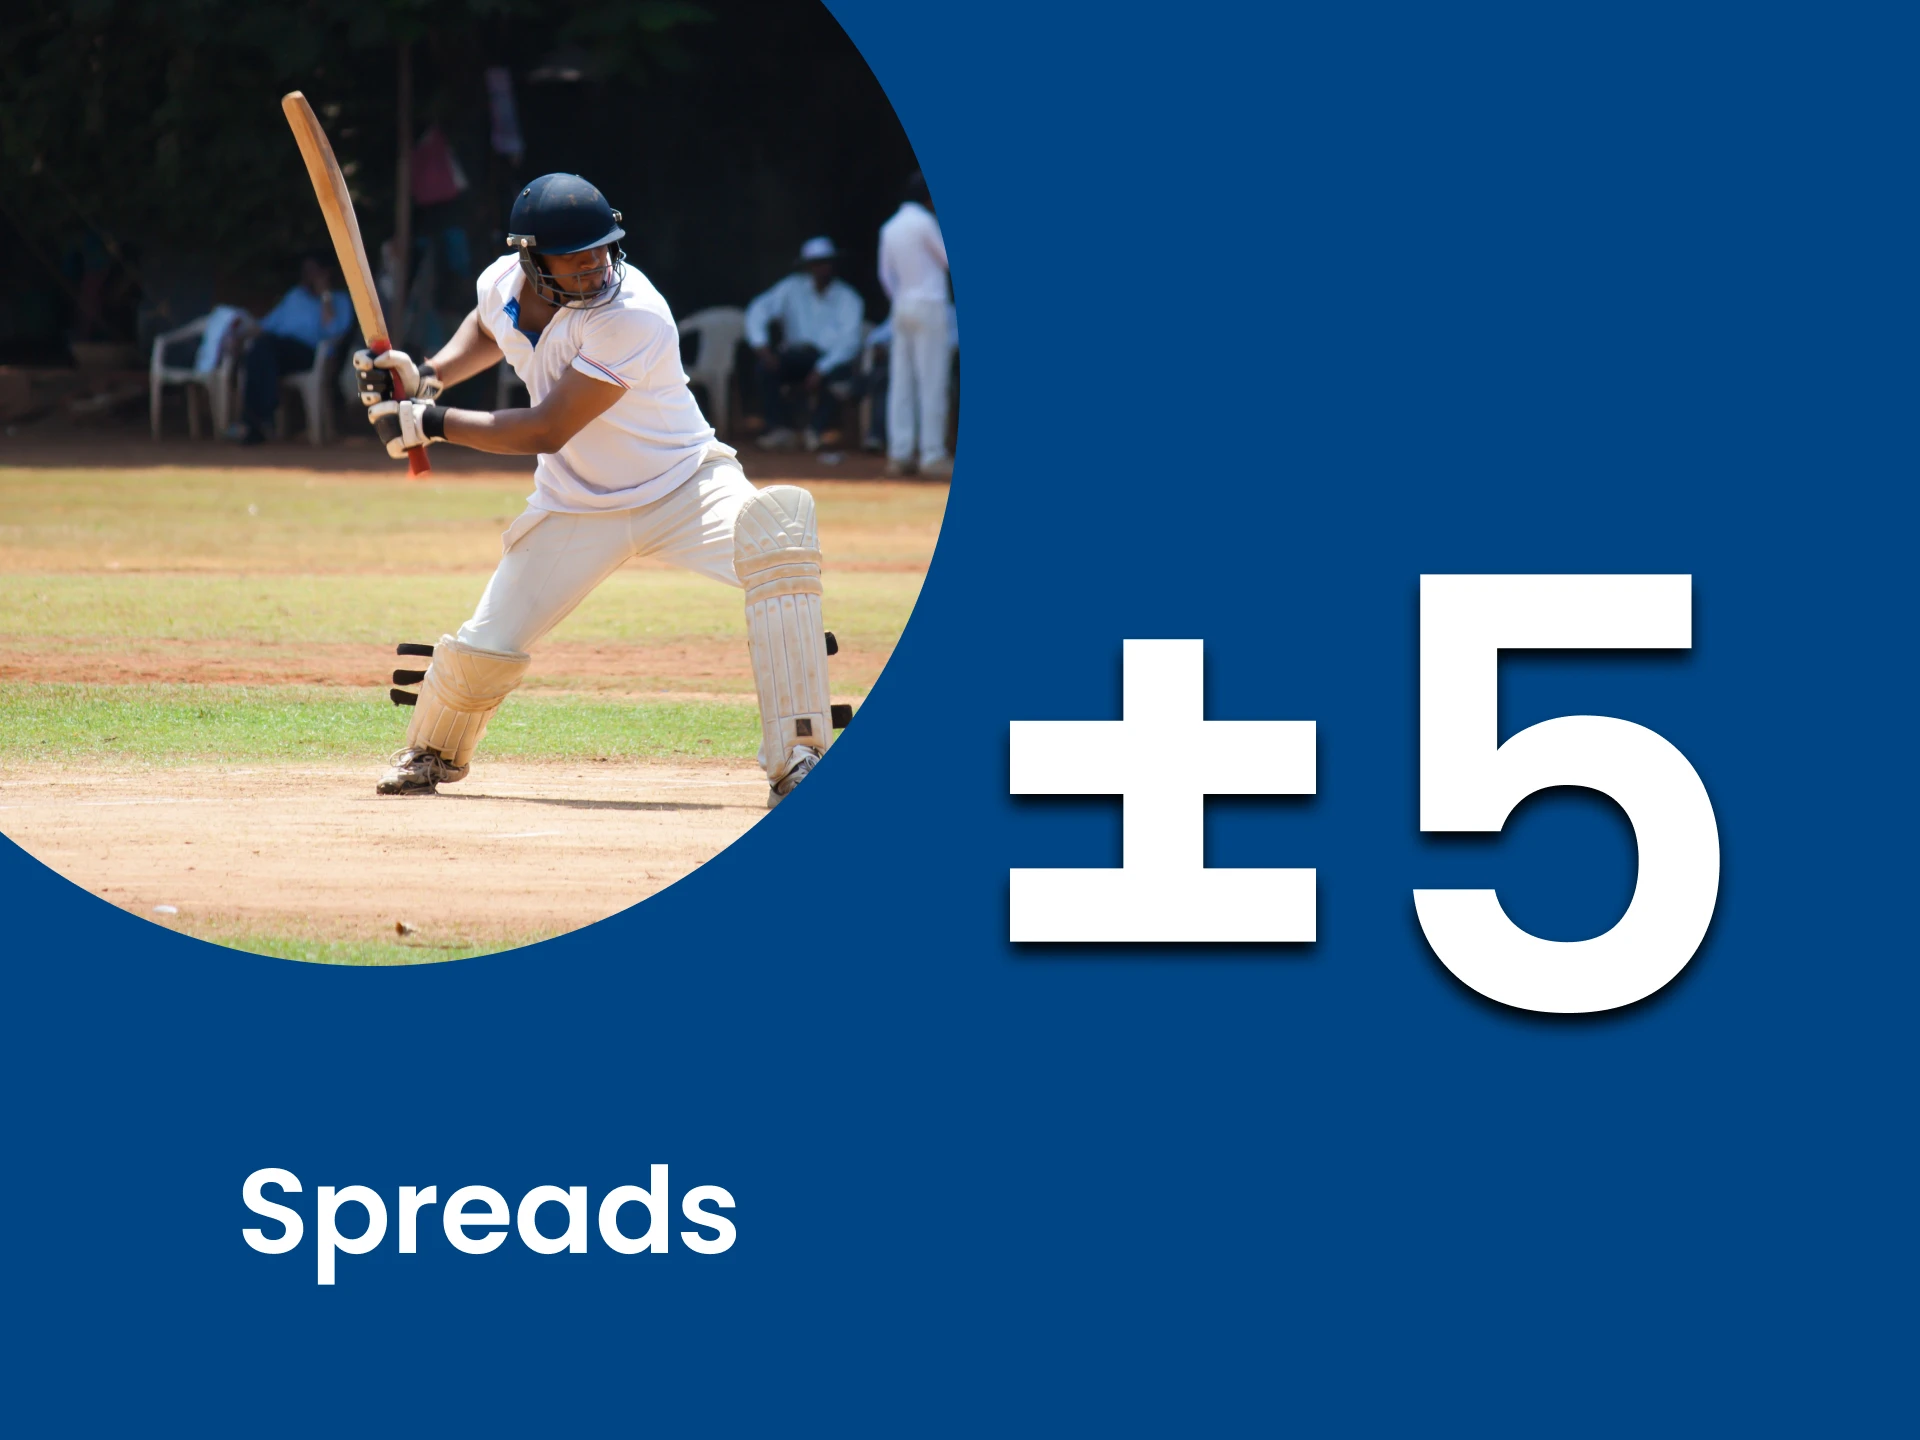 Choose the "Spreads" strategy for sports betting.